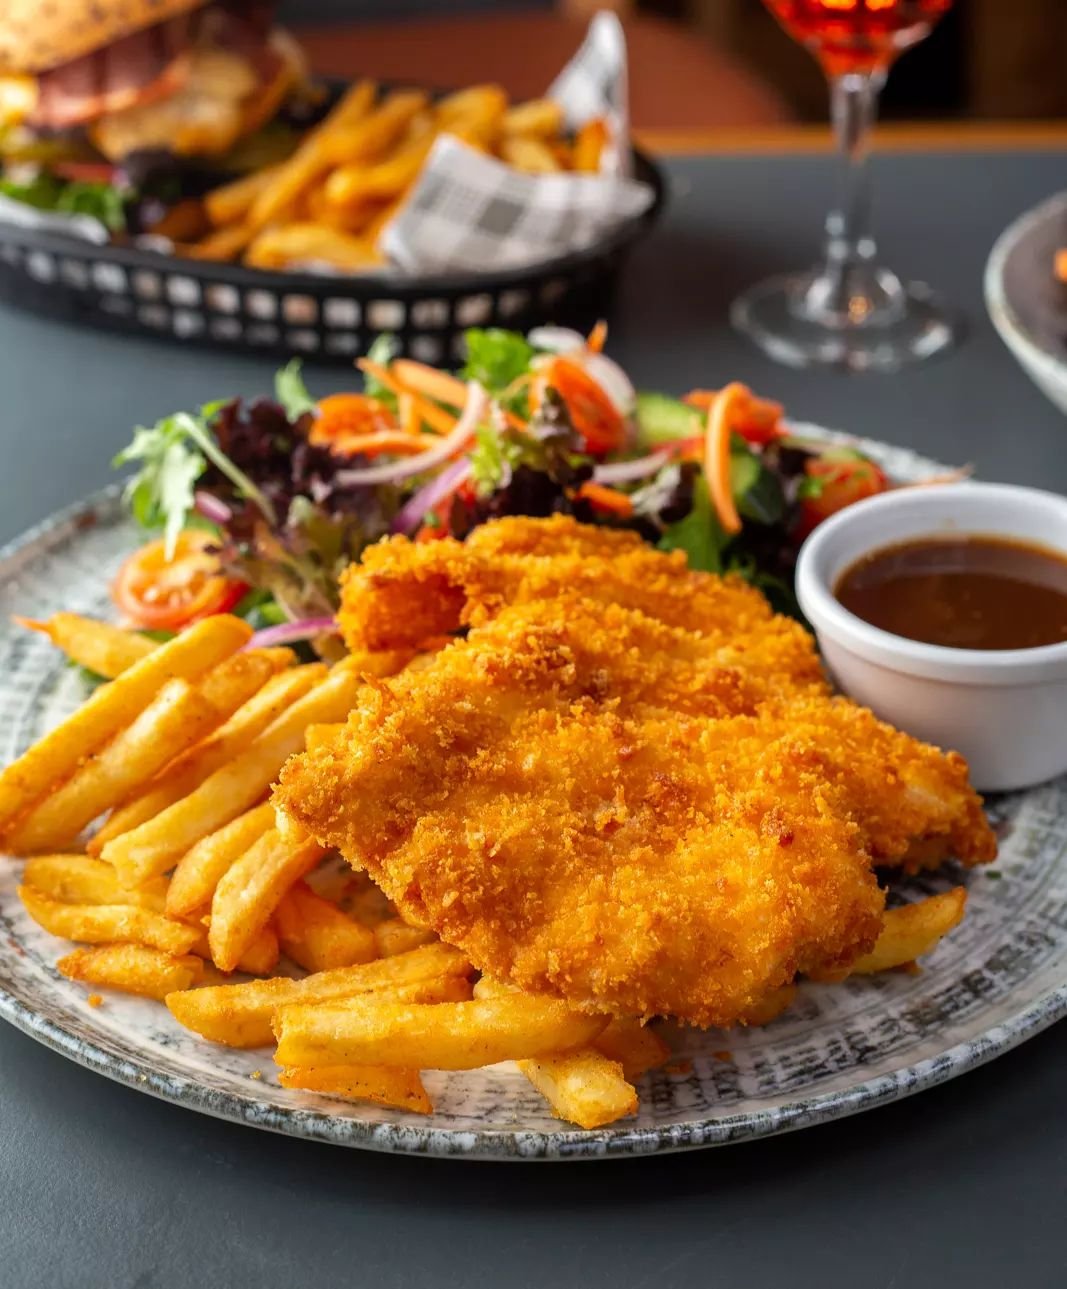 Wednesdays got you feeling schnitty? Grab our epic Chicken Schnitzel special, served with chips, salad &amp; gravy, for just $18! Available every Wednesday from The LemonTree🐓